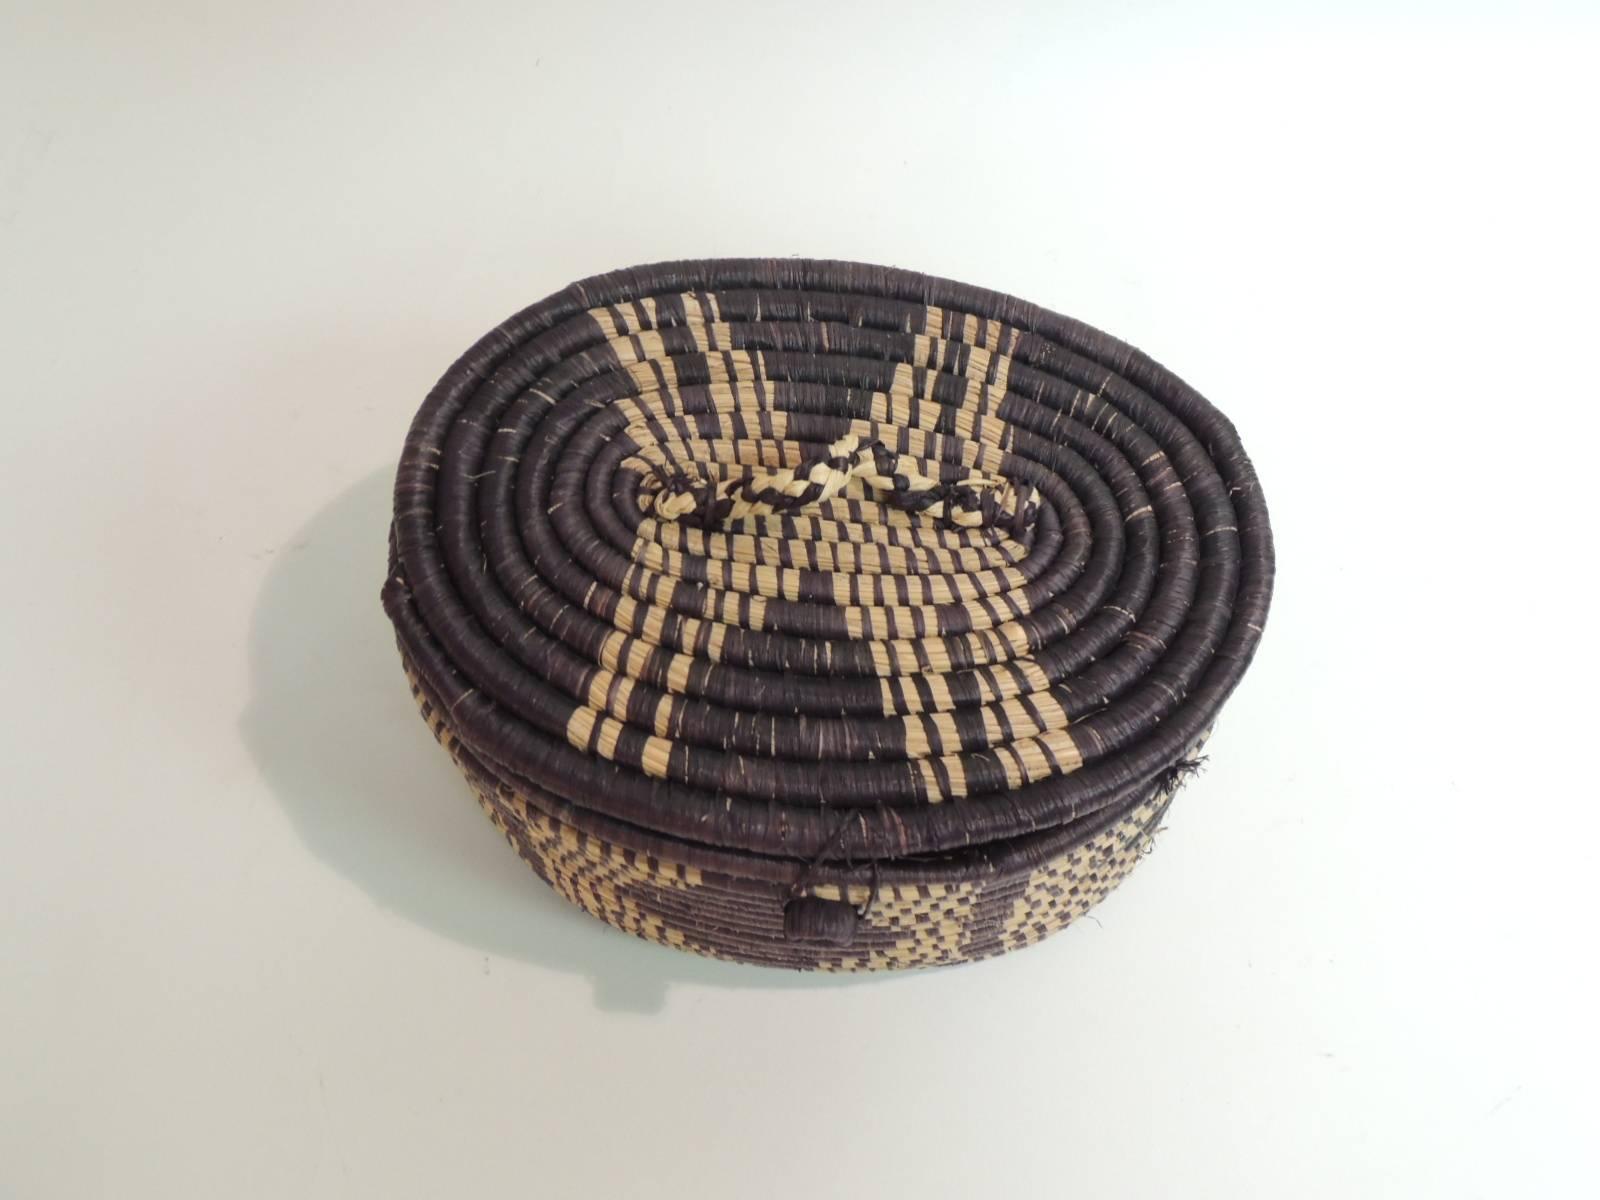 African handwoven oval artisanal basket with Lid
African handwoven oval artisanal basket with a lid made by women in Uganda. 
Artisanal basket with textured finish.
Size: 6 x 8 x 5.5 H.
 